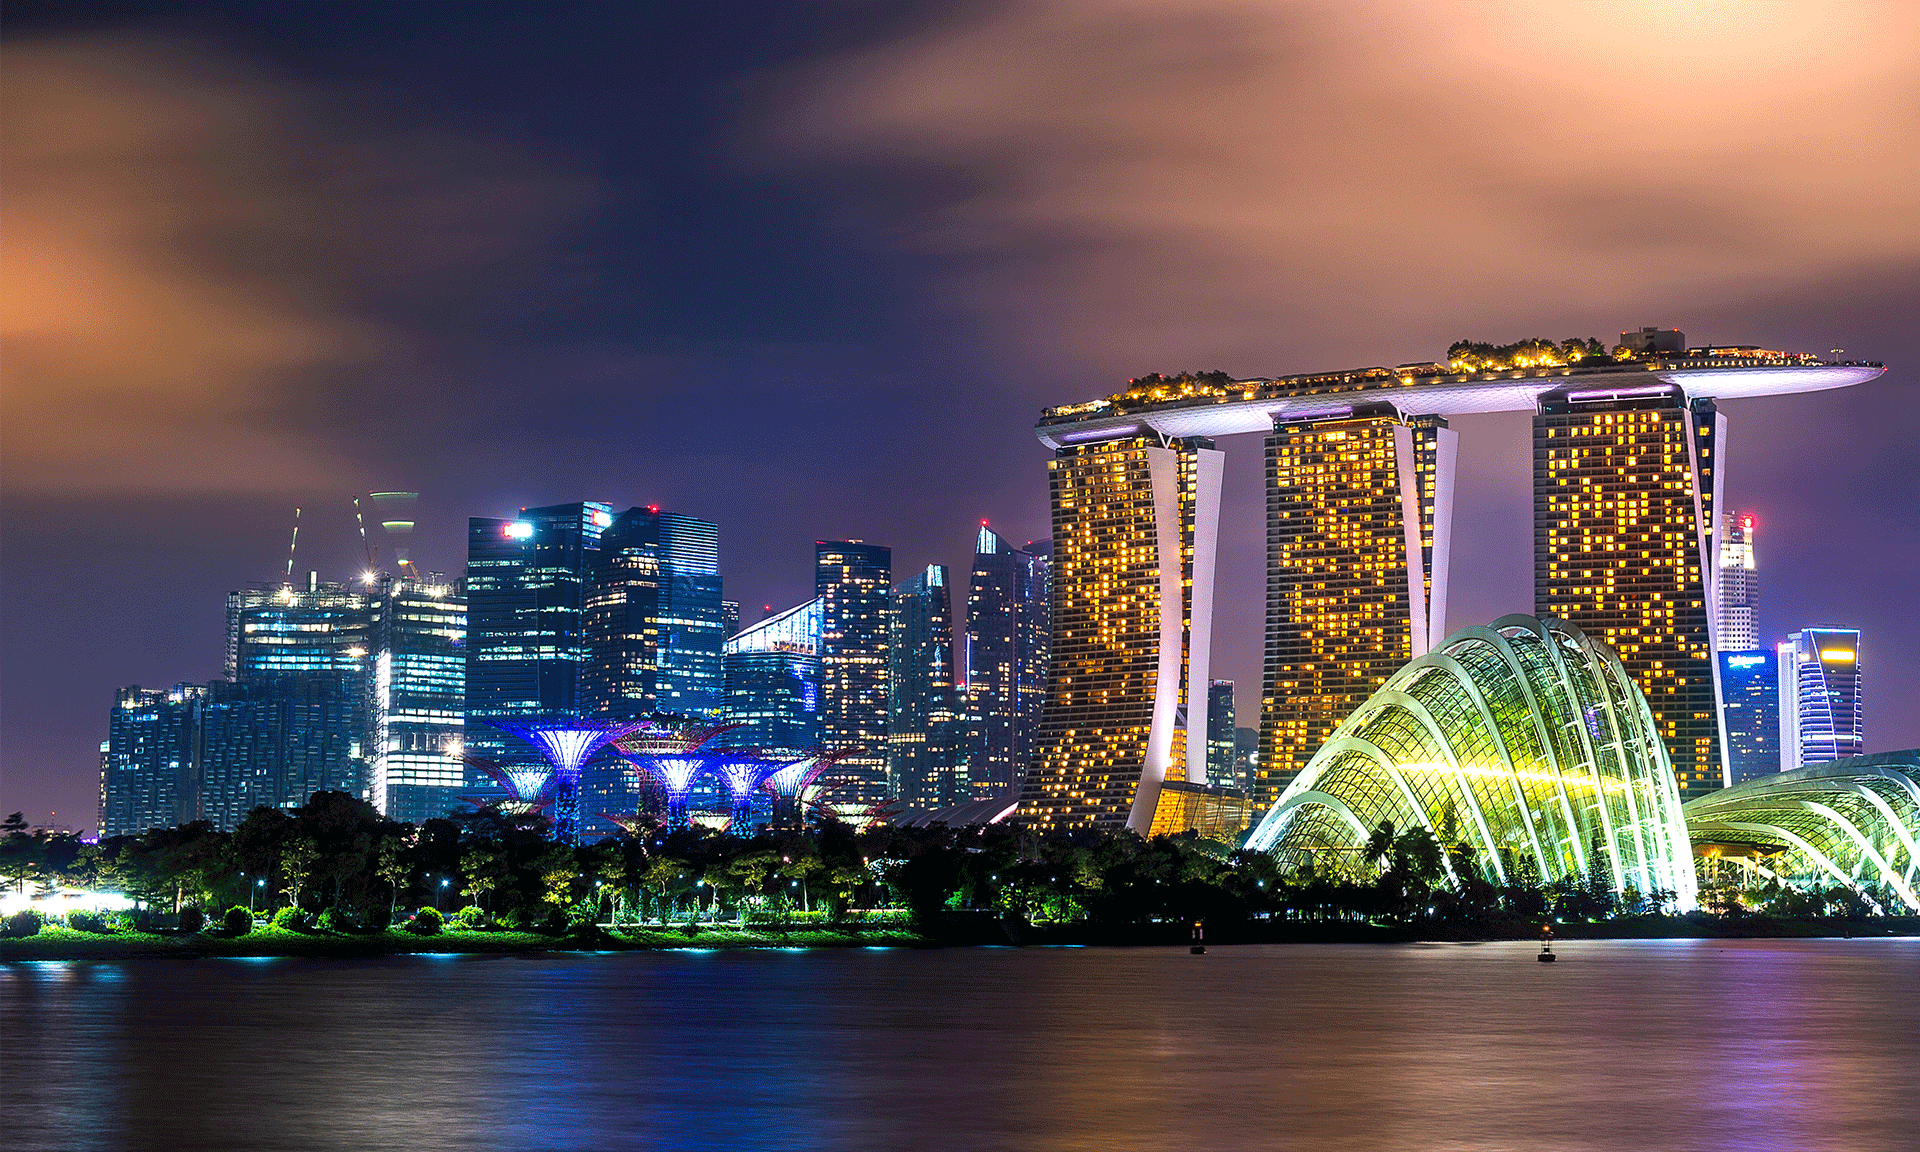 Singapore is instrumental in attracting the highest Fintech Investment amongst all Asian countries